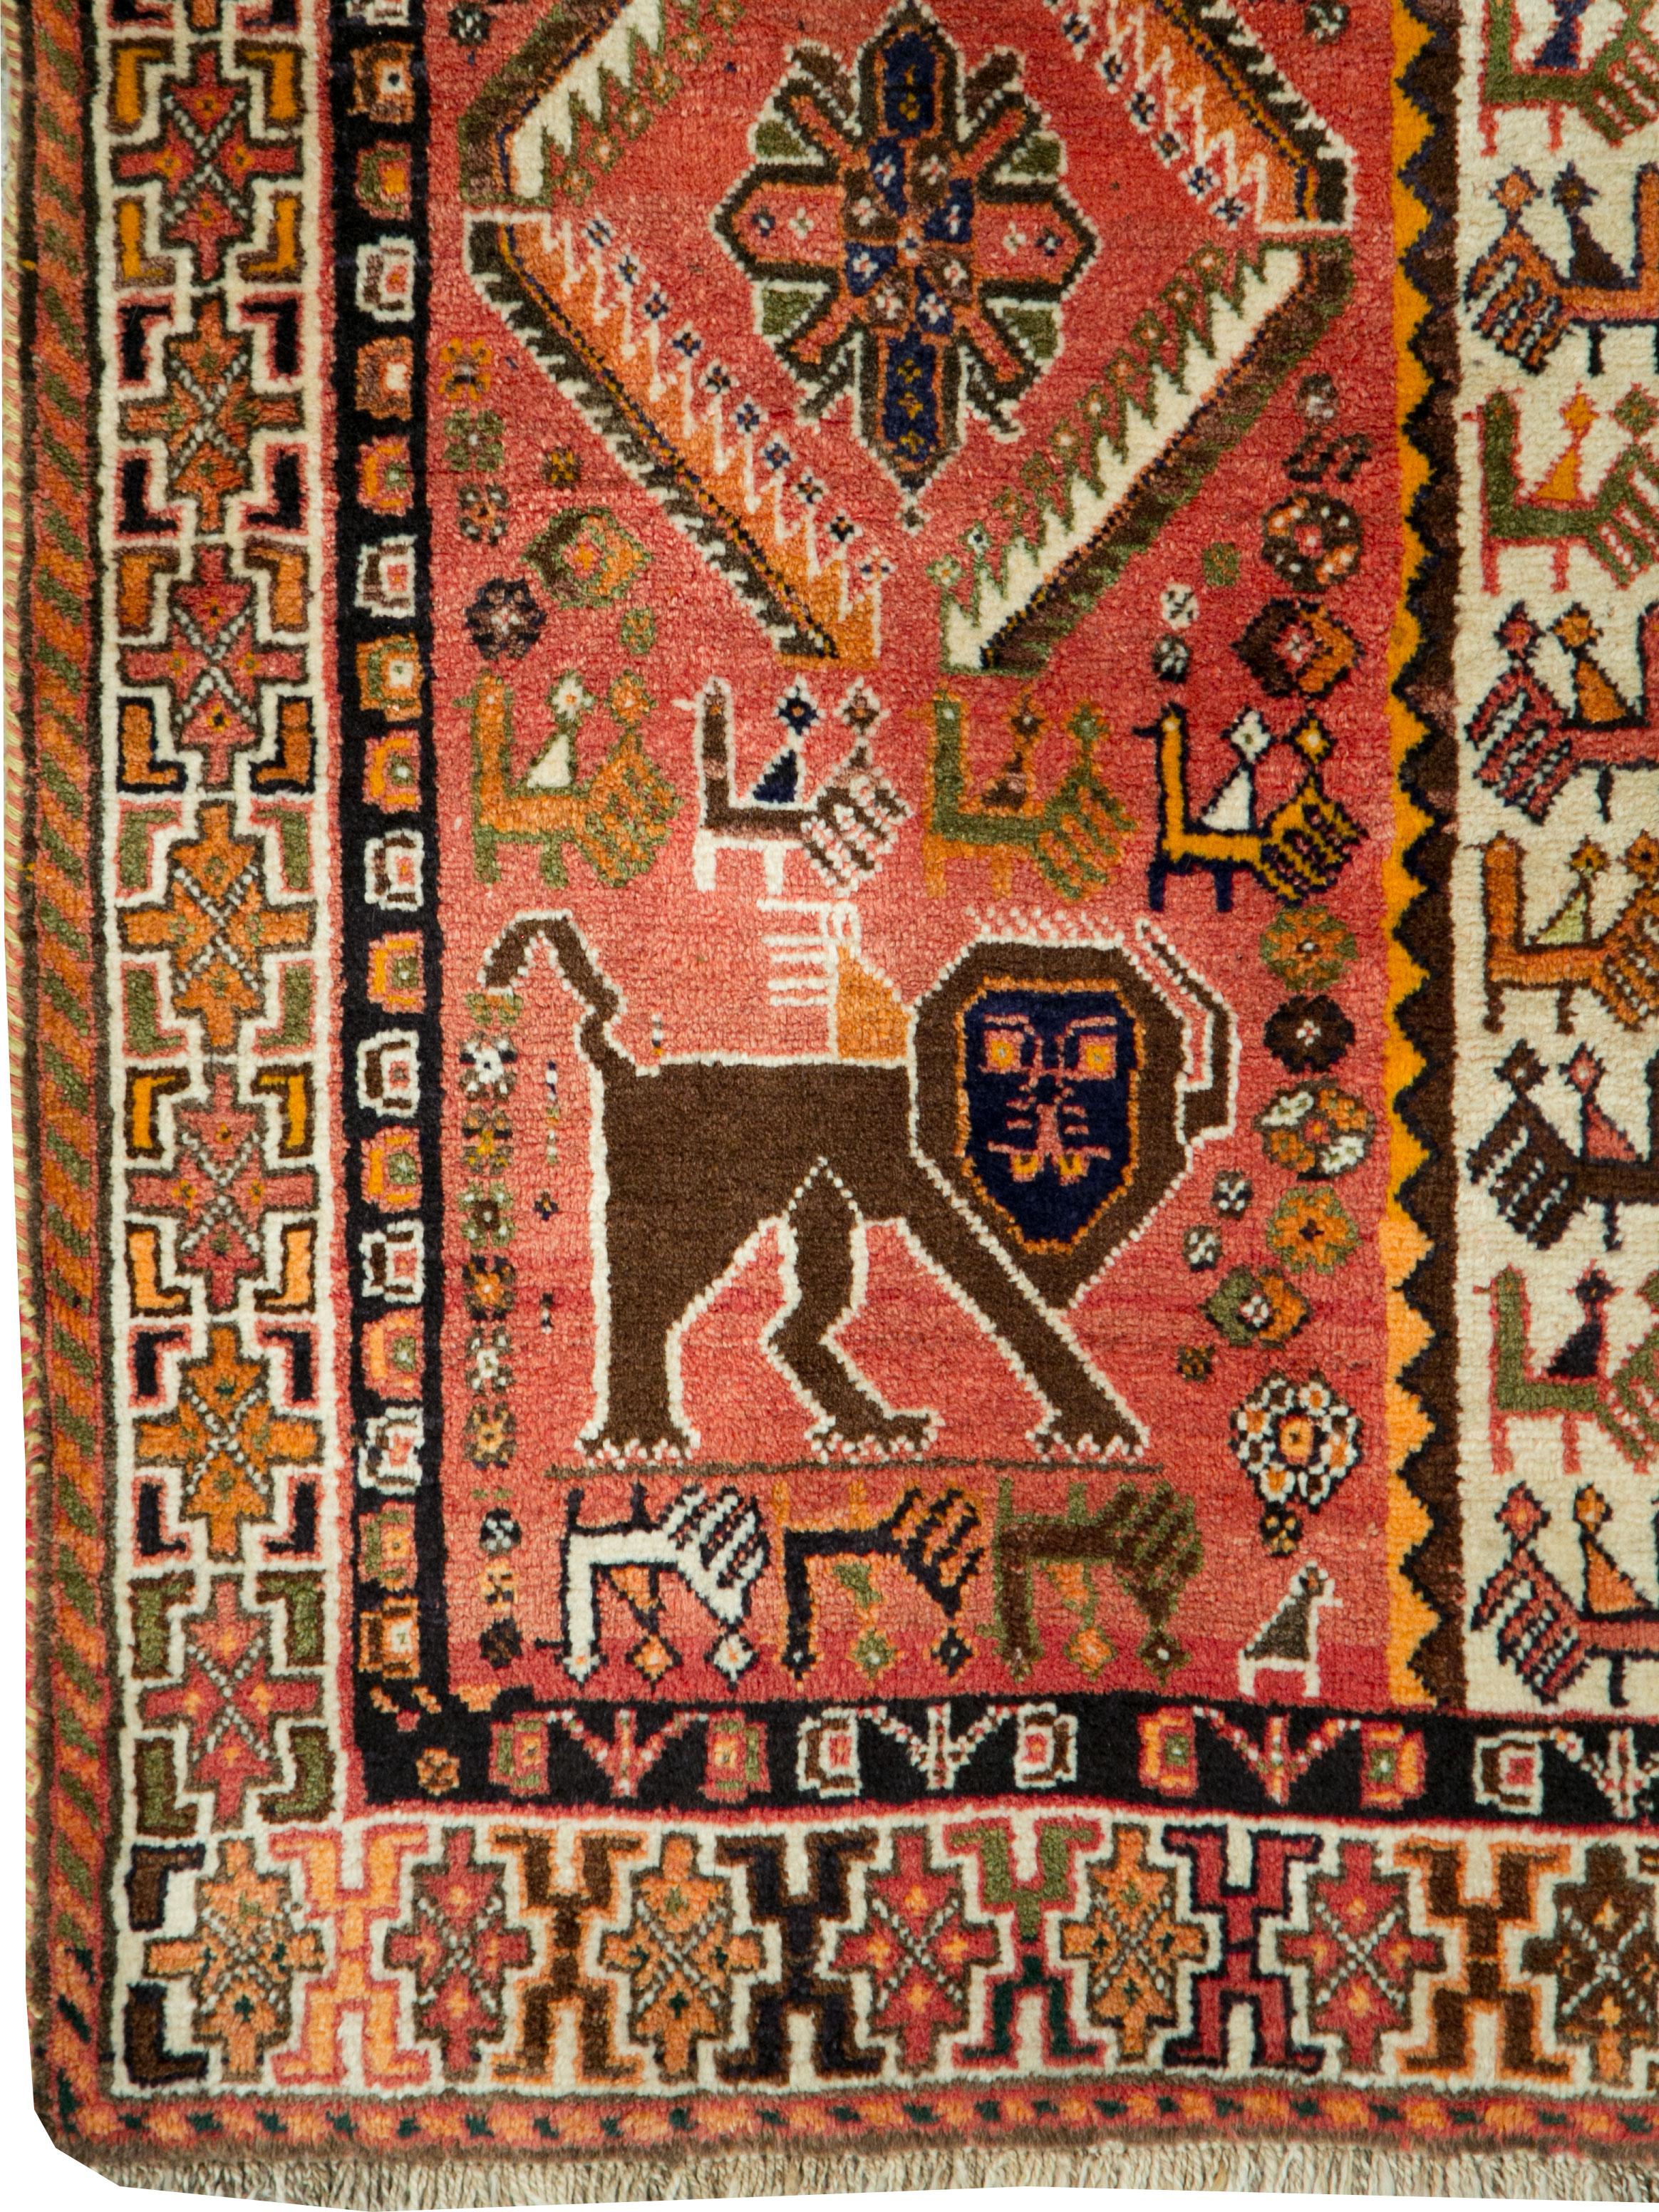 A vintage Persian Shiraz rug from the mid-20th century.